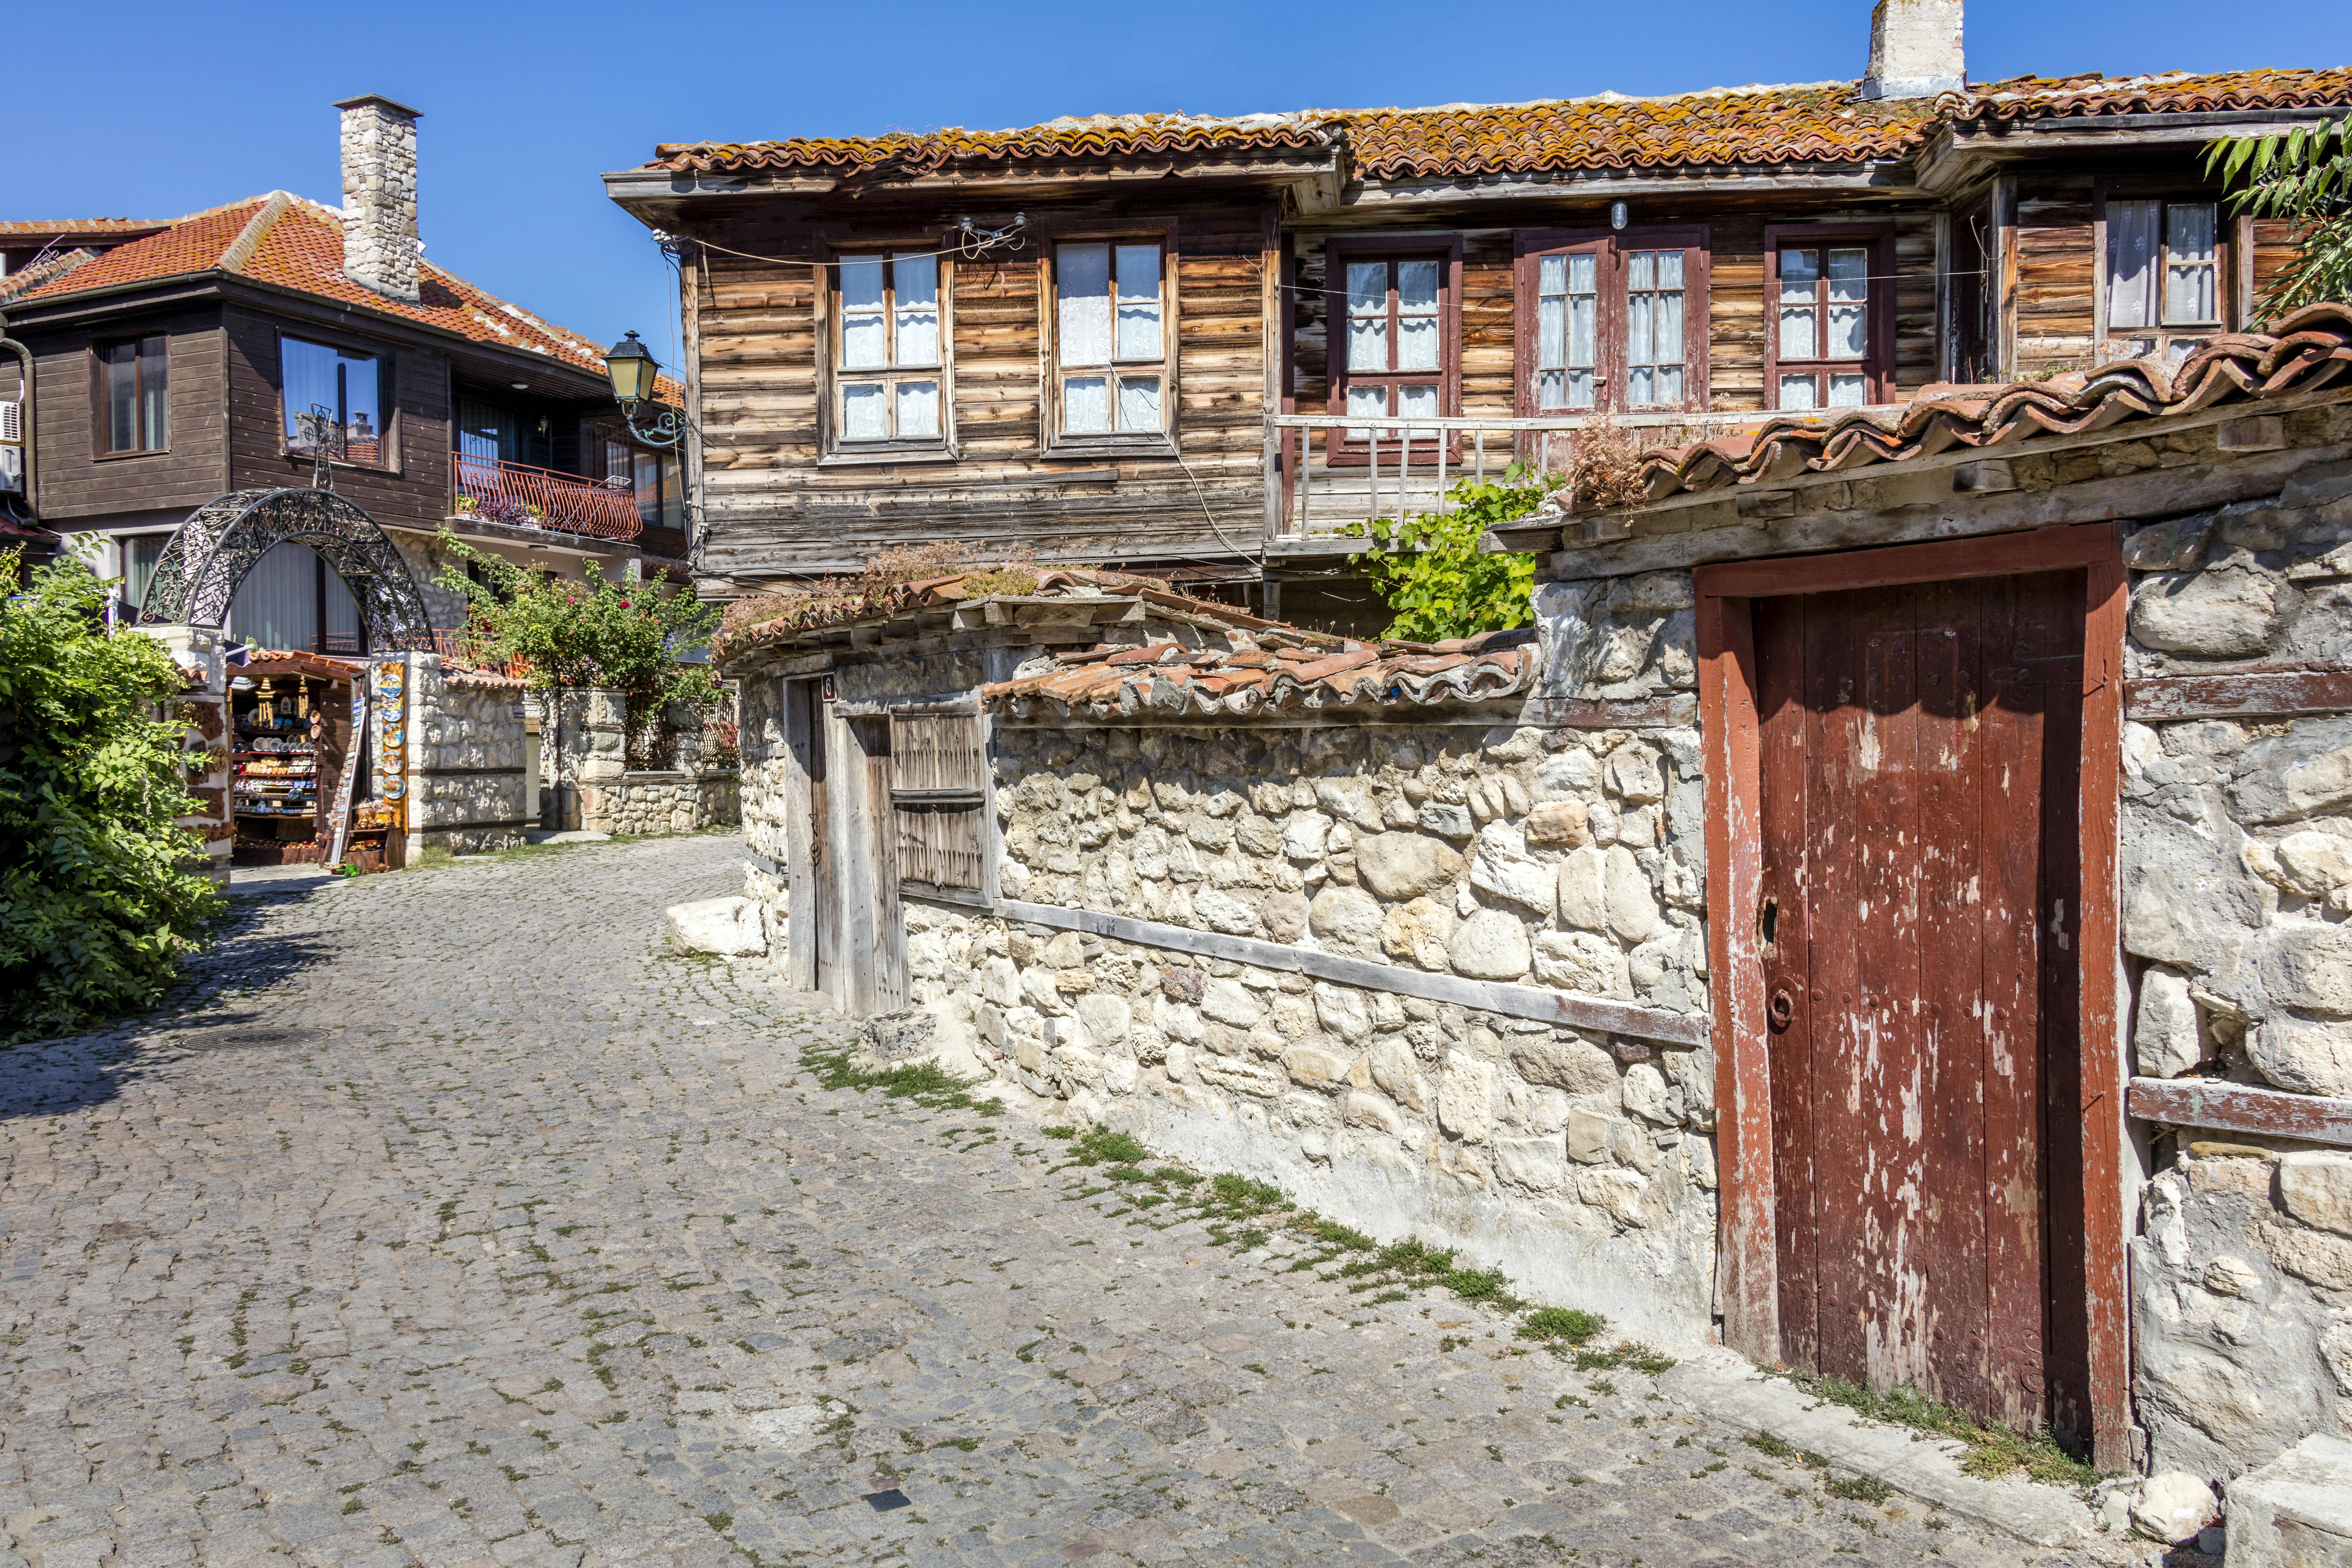 Discover Nessebar – from Obzor